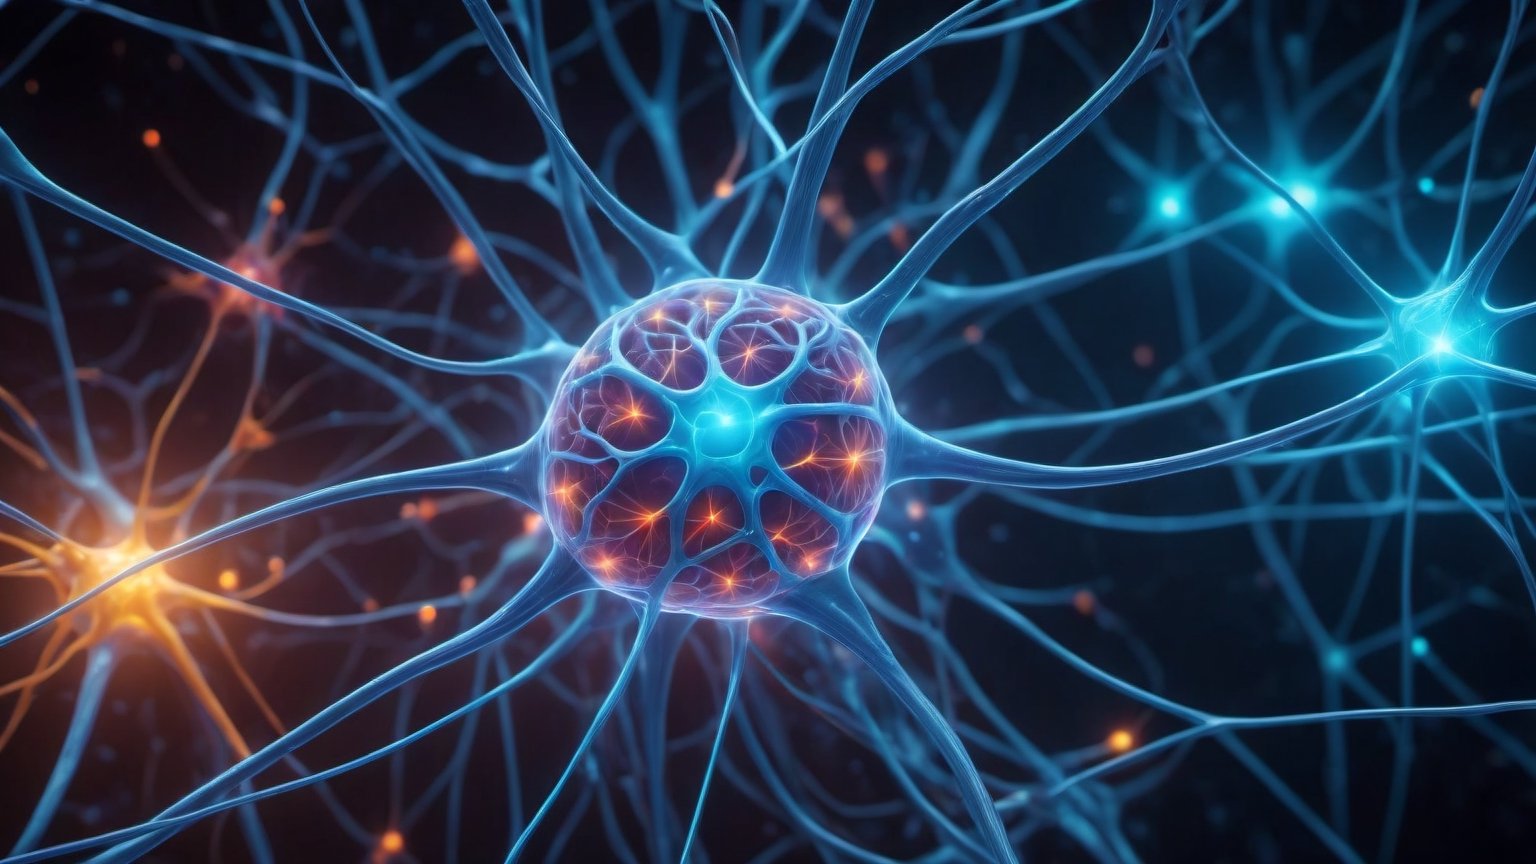 the entire space in the frame is filled with neural connections, glowing neurons as part of a human brain, subsurface scattering, transparent, translucent skin, glow, Bioluminescent blood neurons,3d style, cyborg style, Movie Still, Leonardo Style, cool colors, vibrant, volumetric light, wide angle shot, fractal neuron background